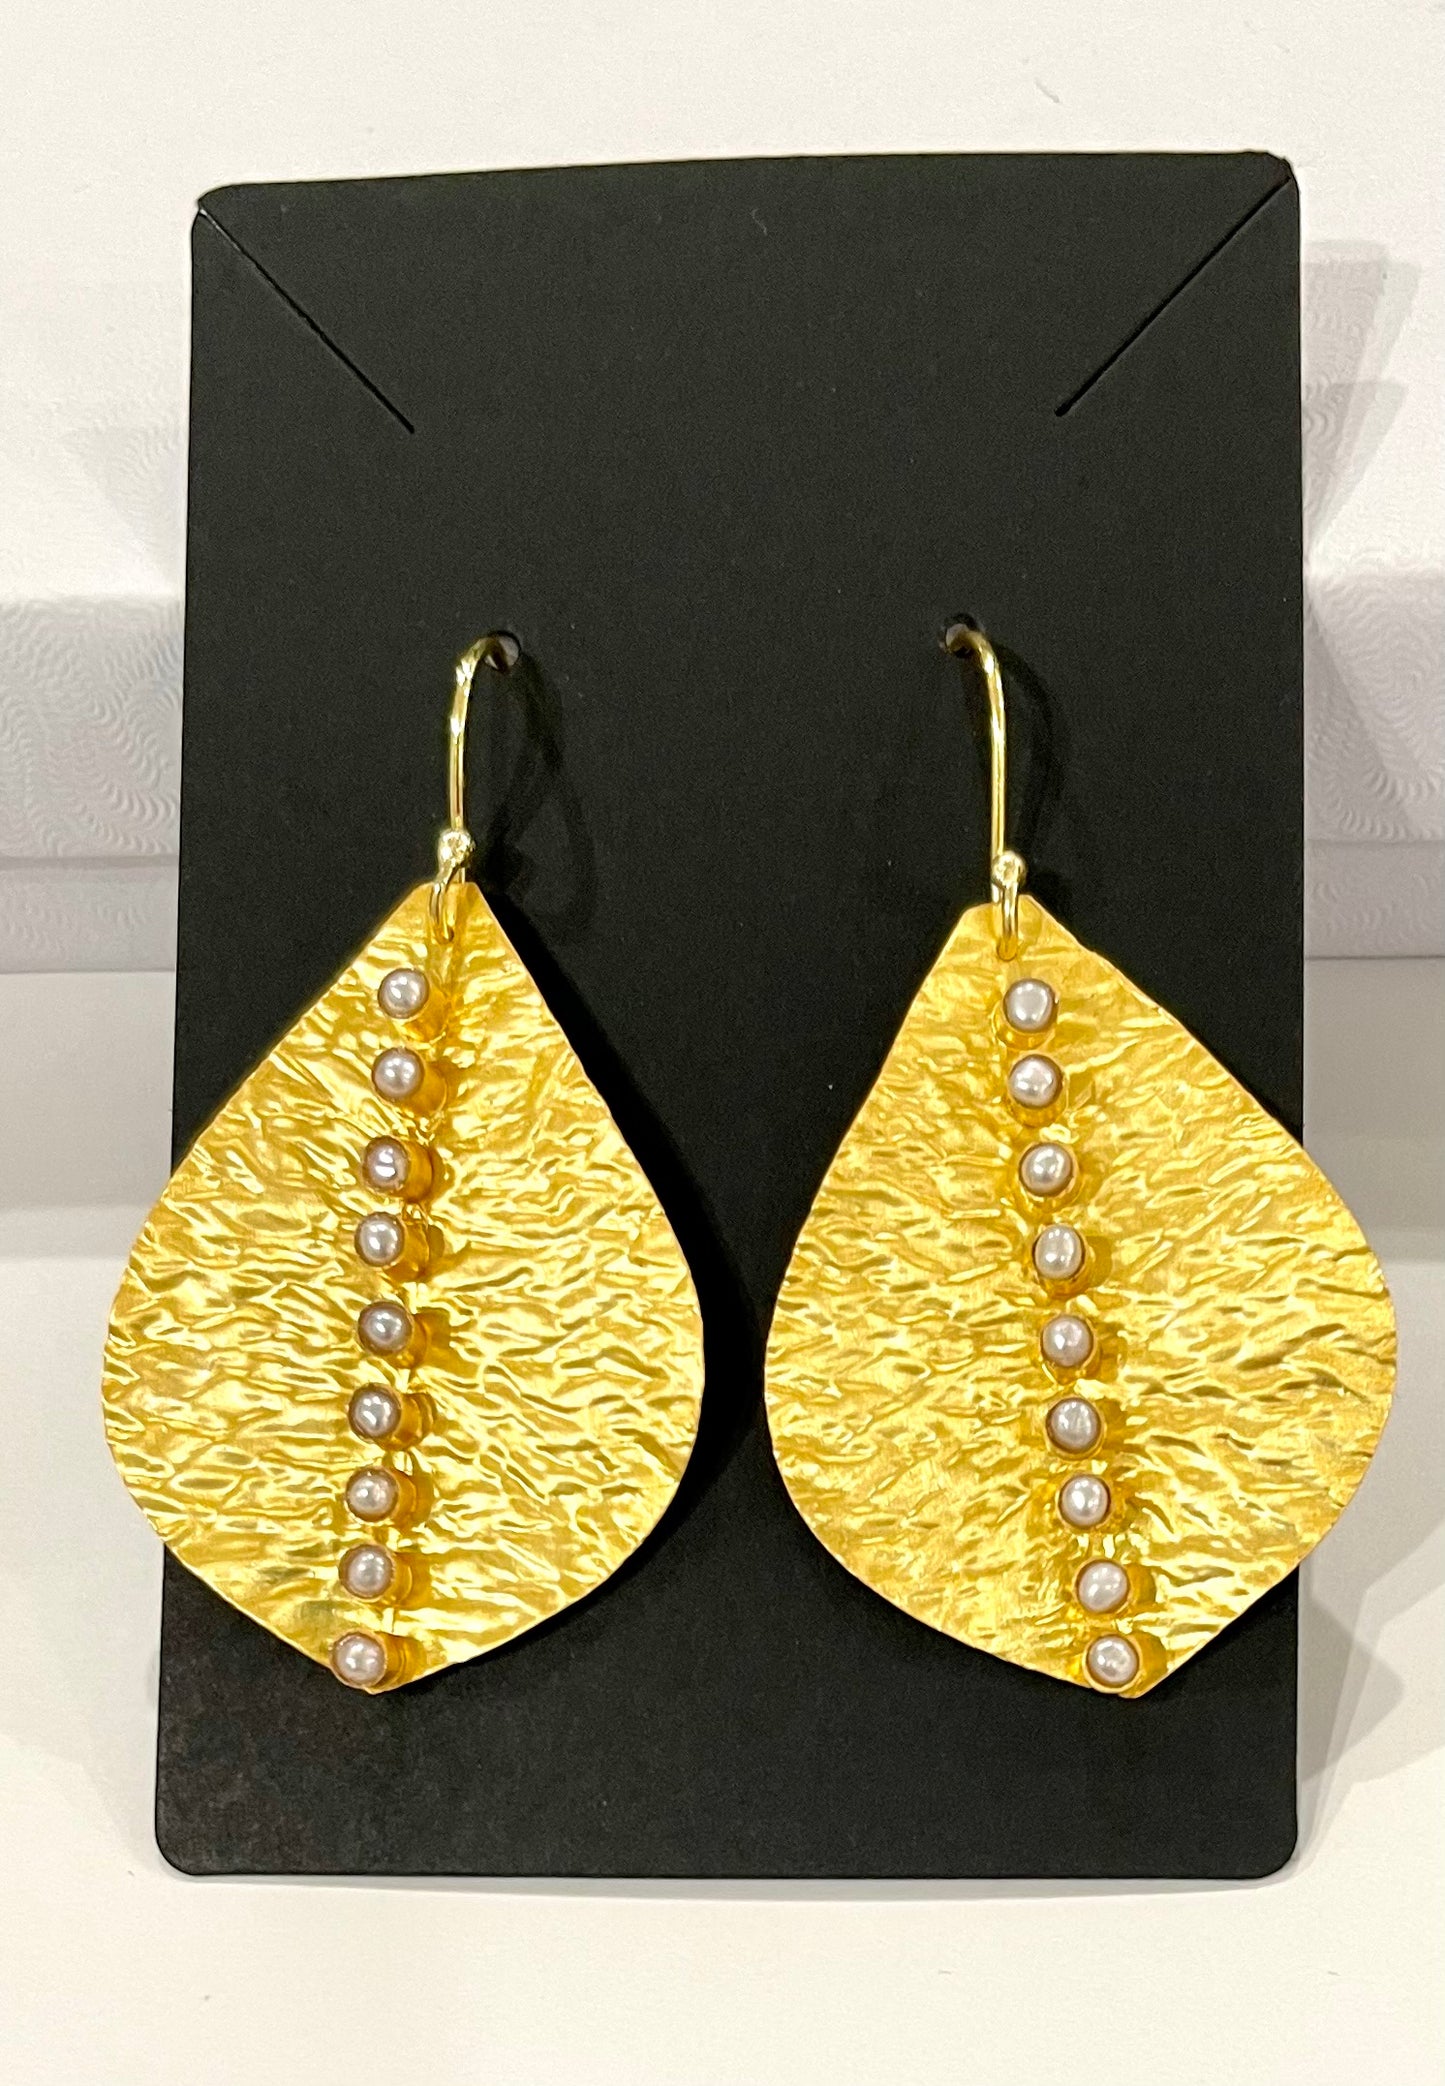 Hammered 22k Gold Leaf  Pearl Statement Earrings 2.5”